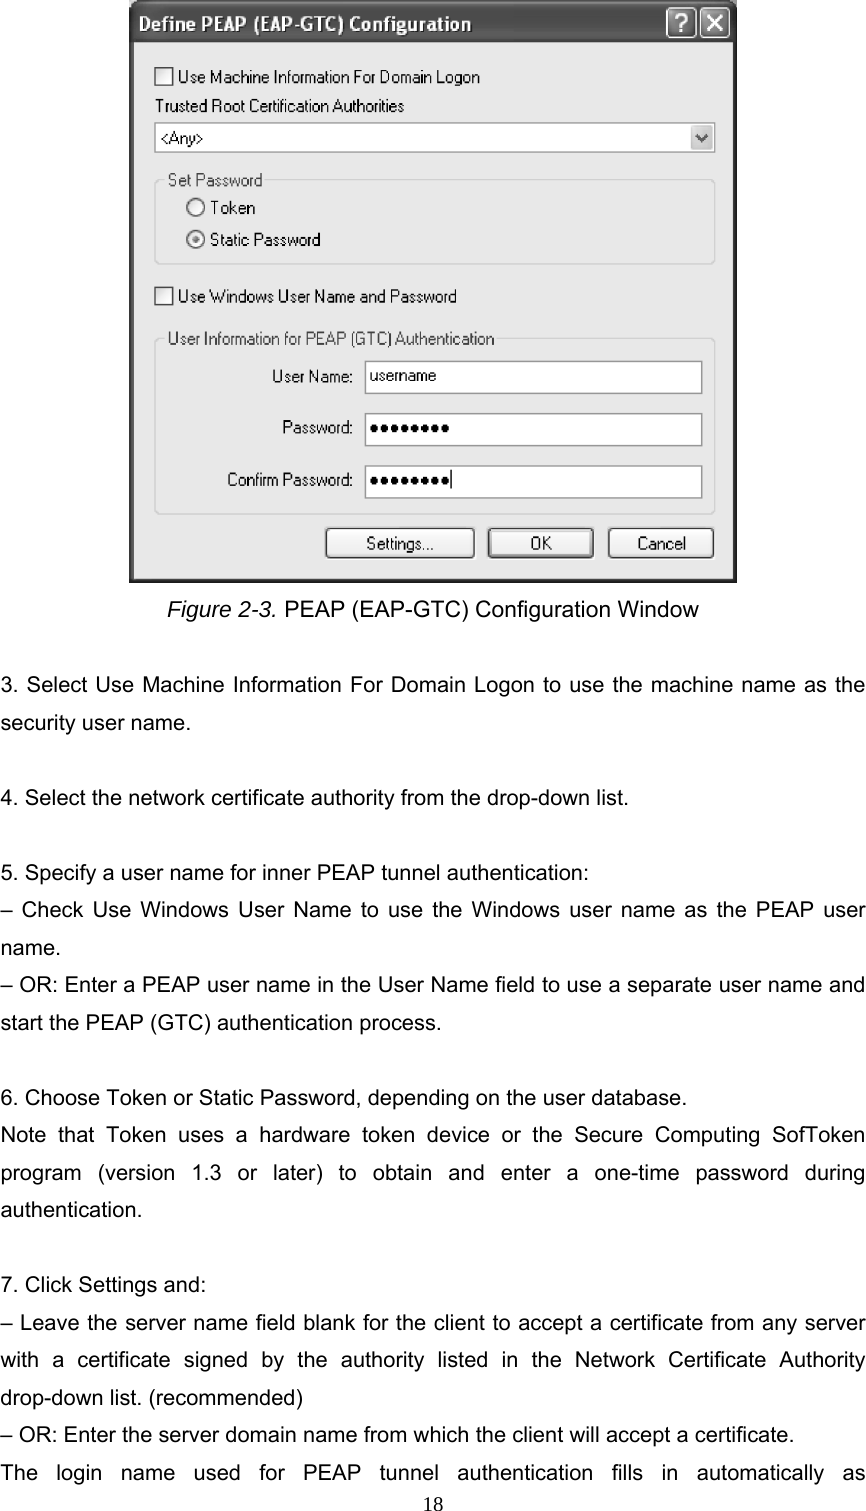  Figure 2-3. PEAP (EAP-GTC) Configuration Window  3. Select Use Machine Information For Domain Logon to use the machine name as the security user name.  4. Select the network certificate authority from the drop-down list.  5. Specify a user name for inner PEAP tunnel authentication: – Check Use Windows User Name to use the Windows user name as the PEAP user name. – OR: Enter a PEAP user name in the User Name field to use a separate user name and start the PEAP (GTC) authentication process.  6. Choose Token or Static Password, depending on the user database. Note that Token uses a hardware token device or the Secure Computing SofToken program (version 1.3 or later) to obtain and enter a one-time password during authentication.  7. Click Settings and: – Leave the server name field blank for the client to accept a certificate from any server with a certificate signed by the authority listed in the Network Certificate Authority drop-down list. (recommended) – OR: Enter the server domain name from which the client will accept a certificate. The login name used for PEAP tunnel authentication fills in automatically as  18